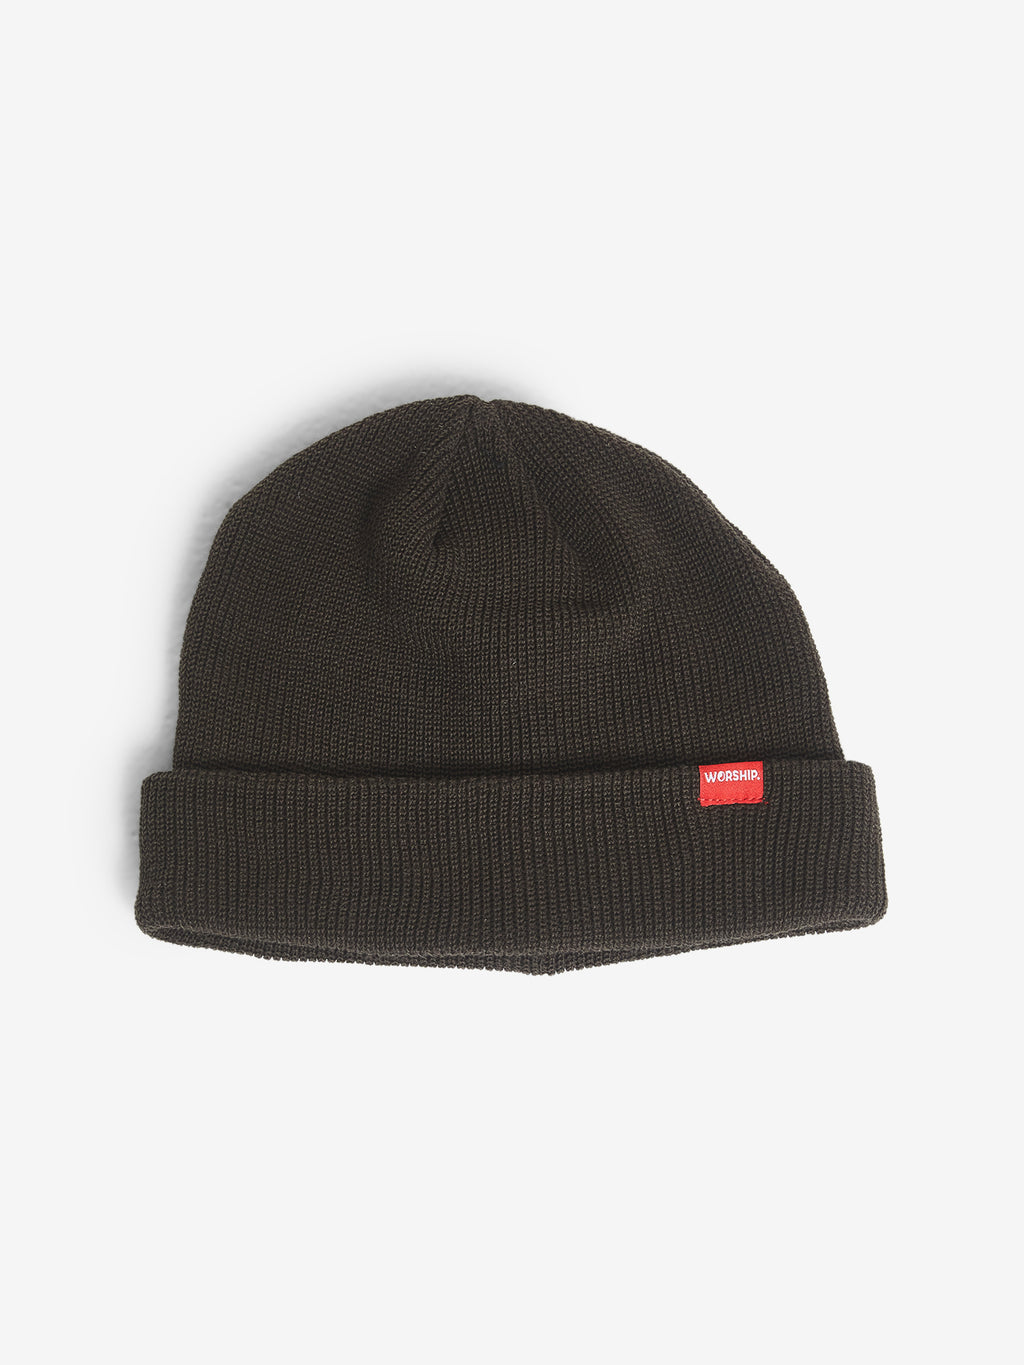 Lumber Beanie - Major Brown One Size